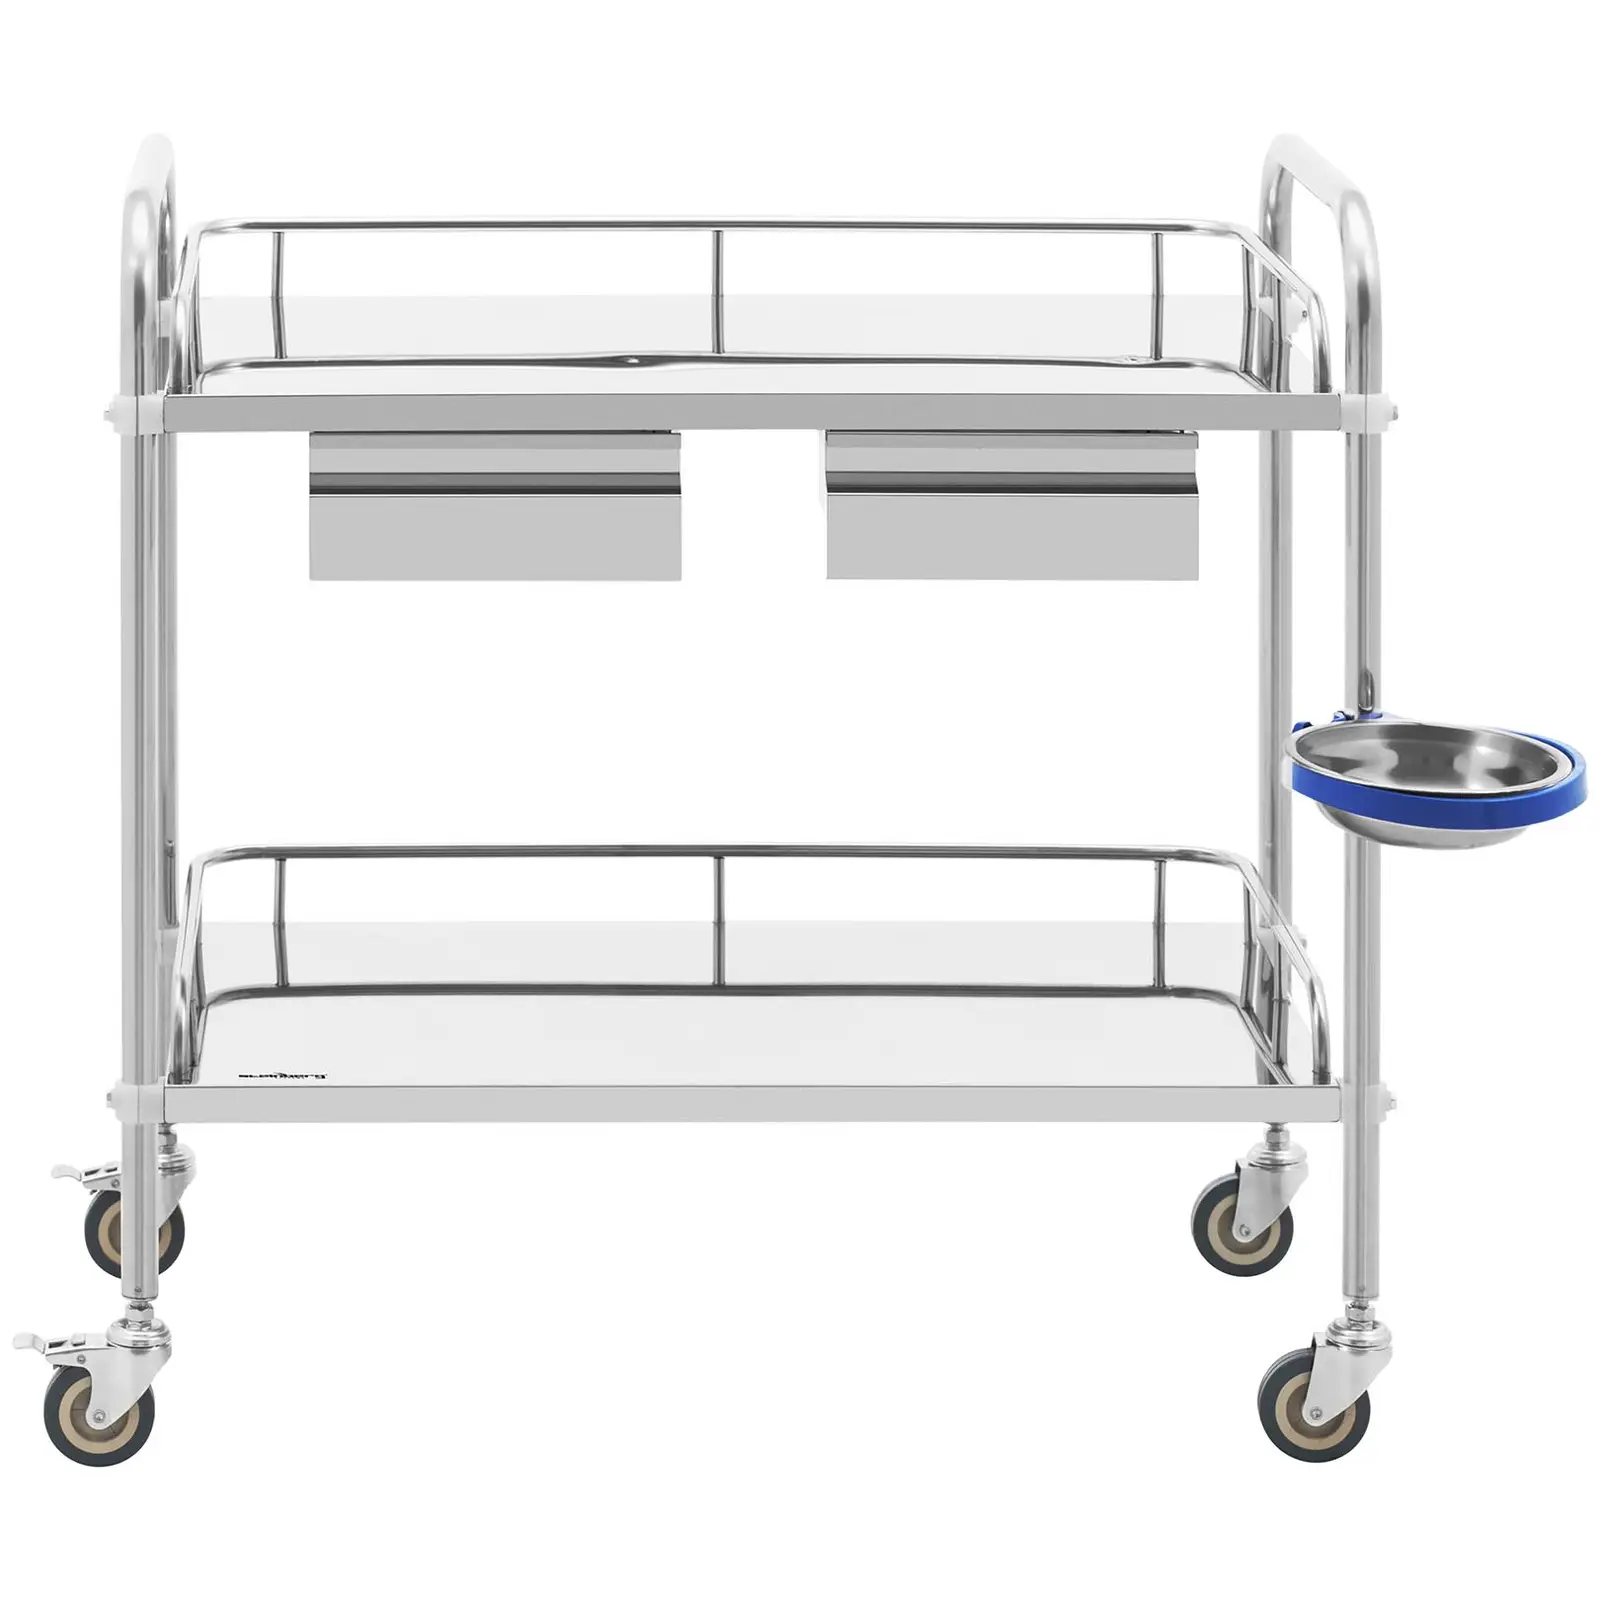 Laboratory Trolley - stainless steel - 2 shelves each 74 x 44 x 13 cm - 2 drawers - 20 kg